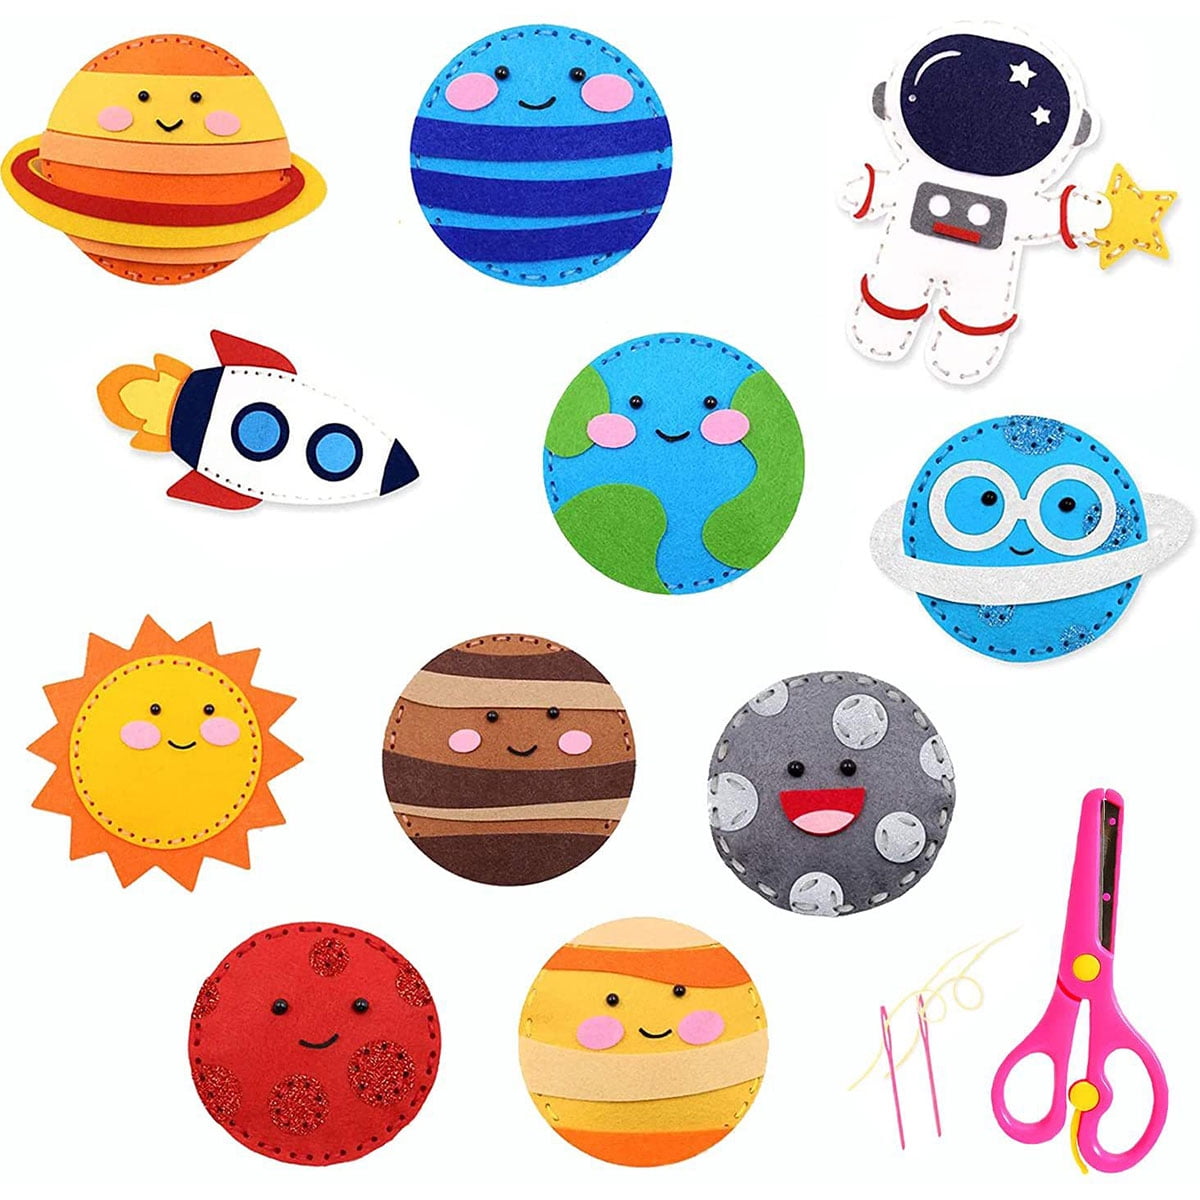 CiyvoLyeen Space Sewing Kit for Kids Solar System DIY Activity Kids Felt Craft Supplies for Girls and Boys Educational Beginners Sewing Set of 11